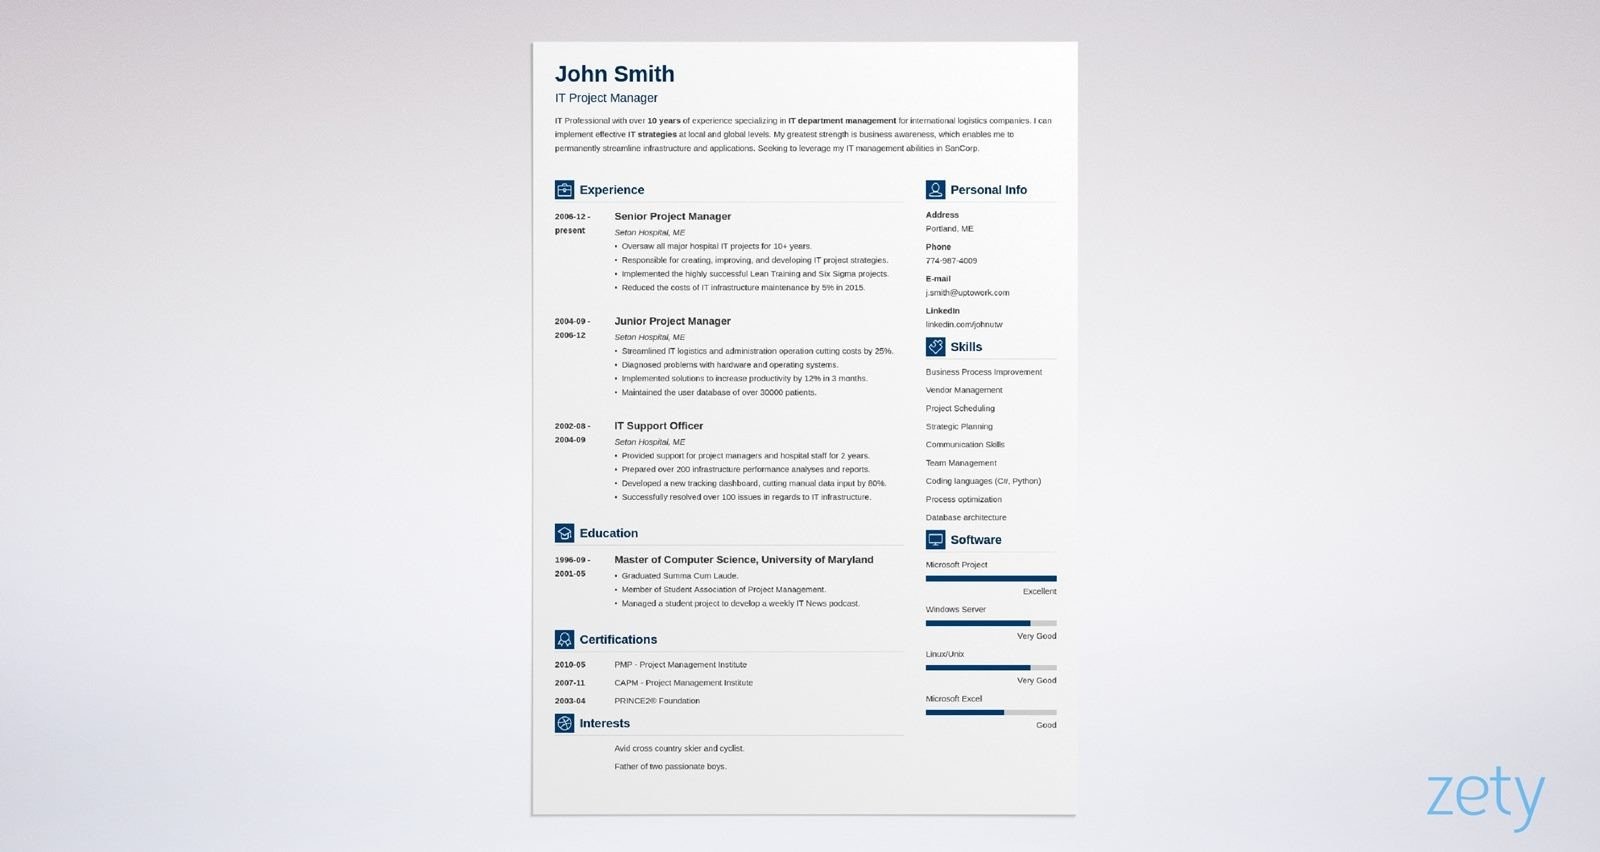 2019 Resume Template from cdn-images.zety.com